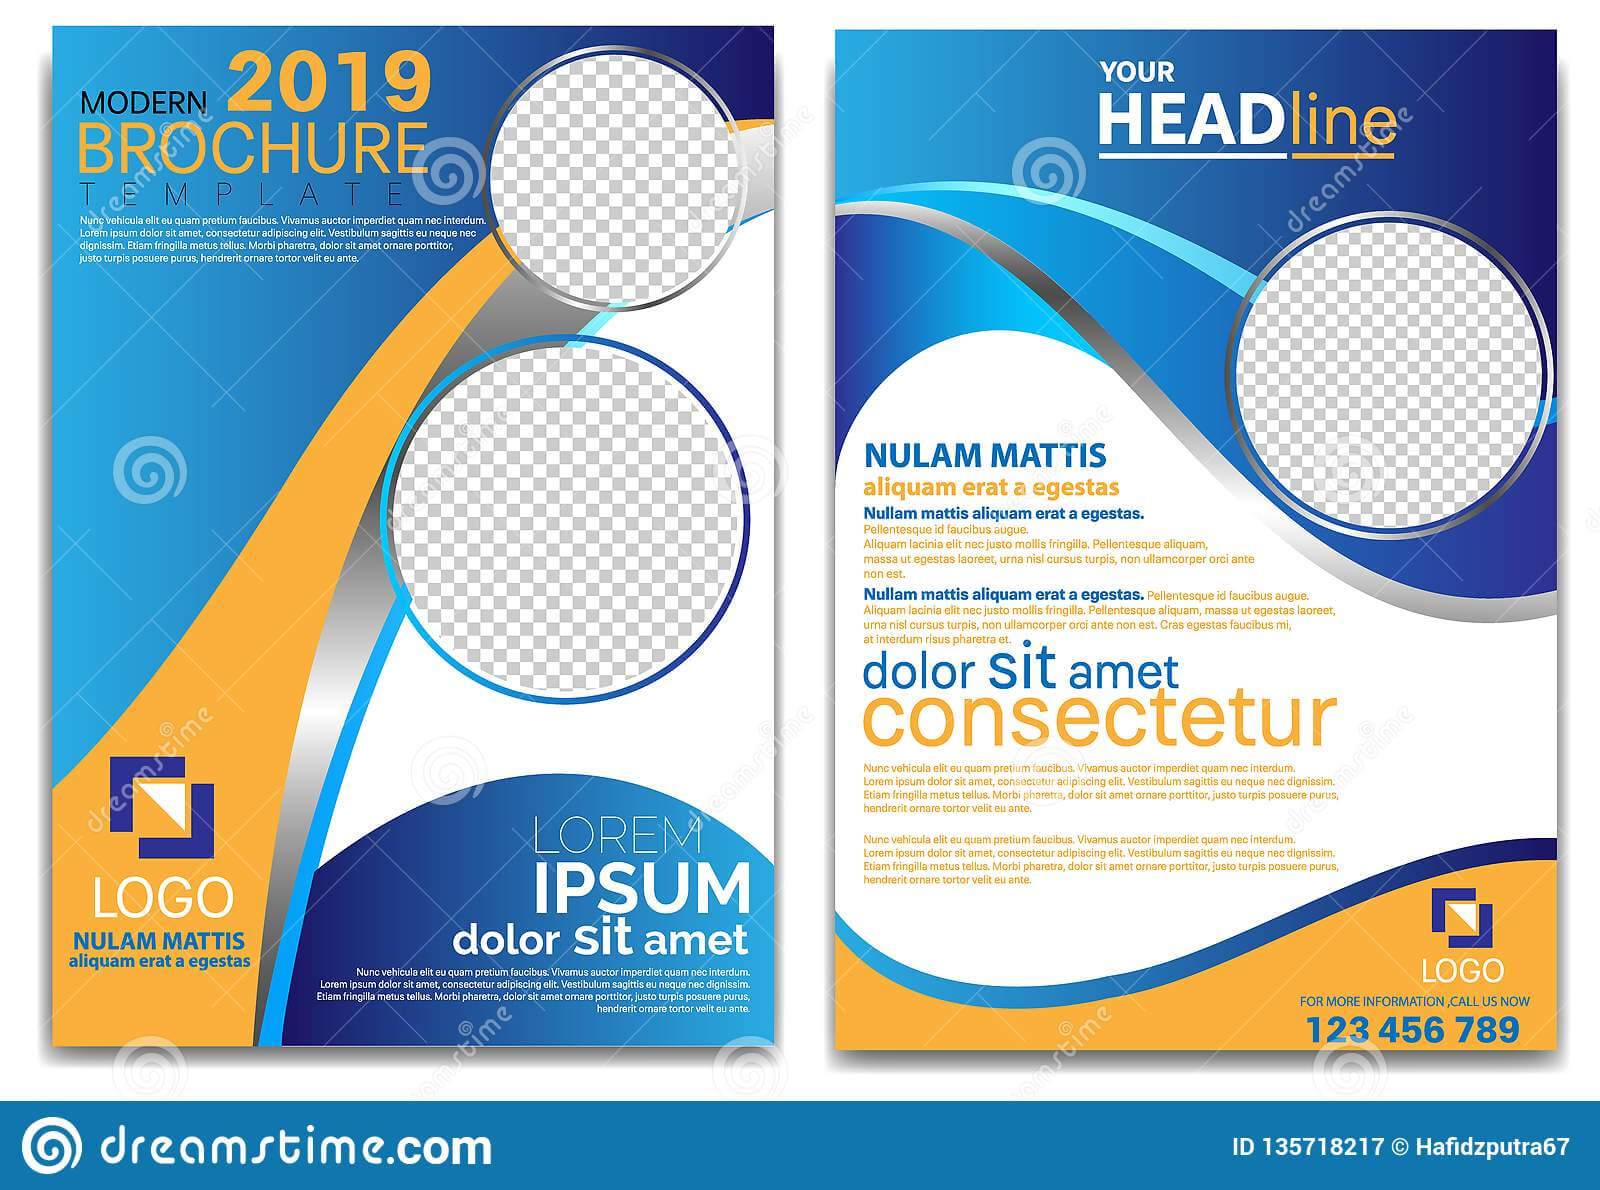 Modern Brochure Template 2019 And Professional Brochure Within School Brochure Design Templates